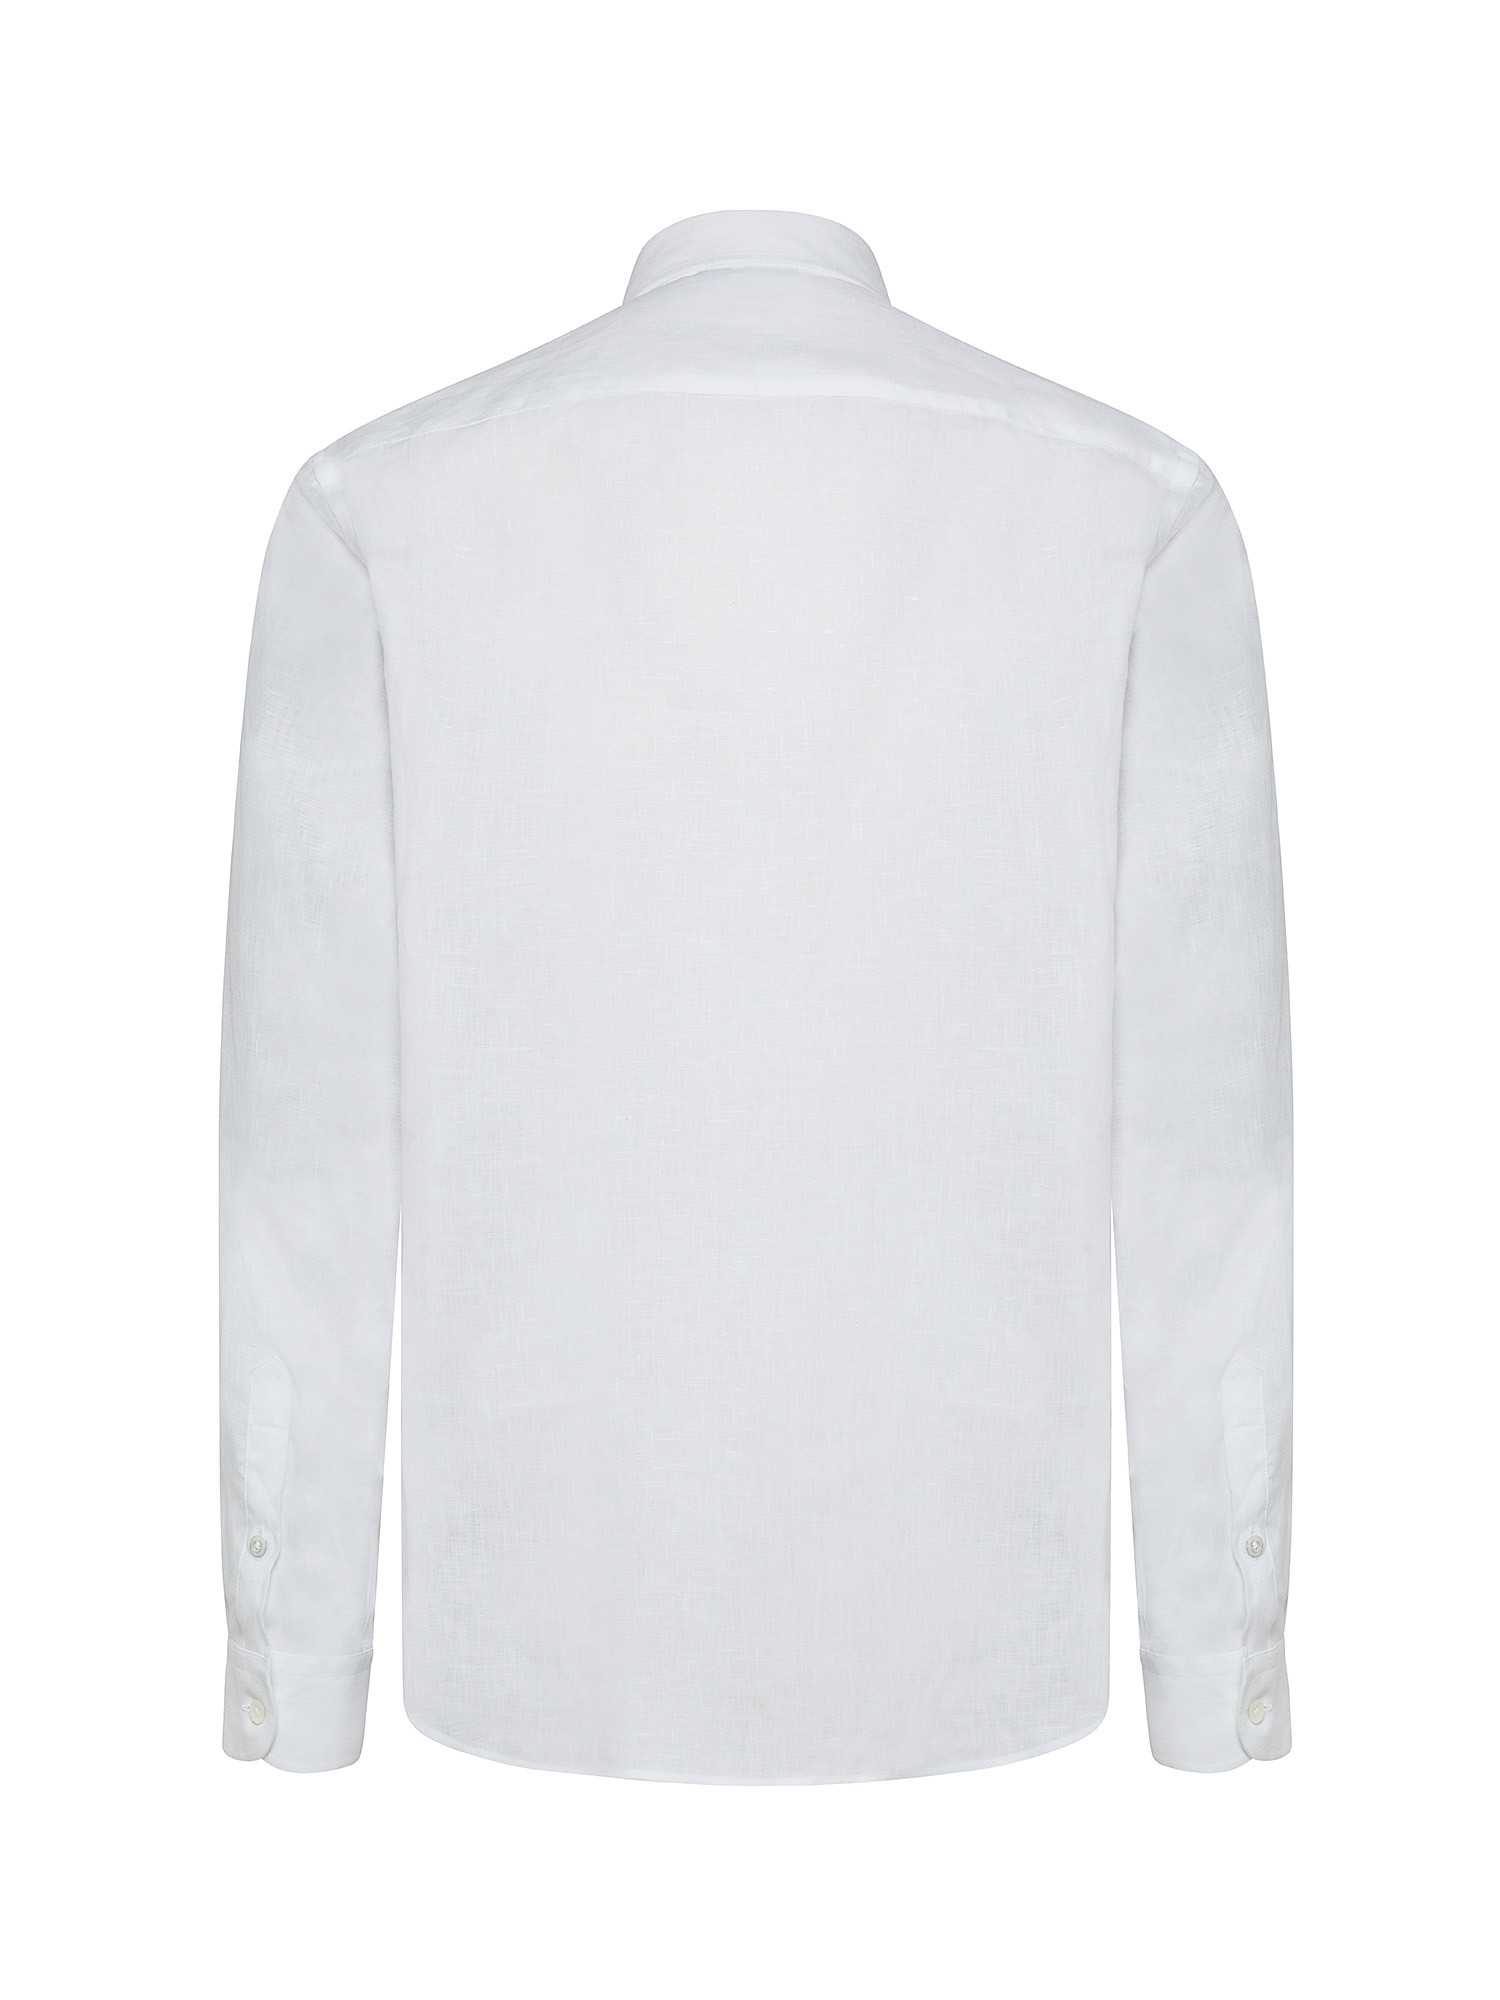 Emporio Armani - Relaxed fit shirt in pure linen, White, large image number 2